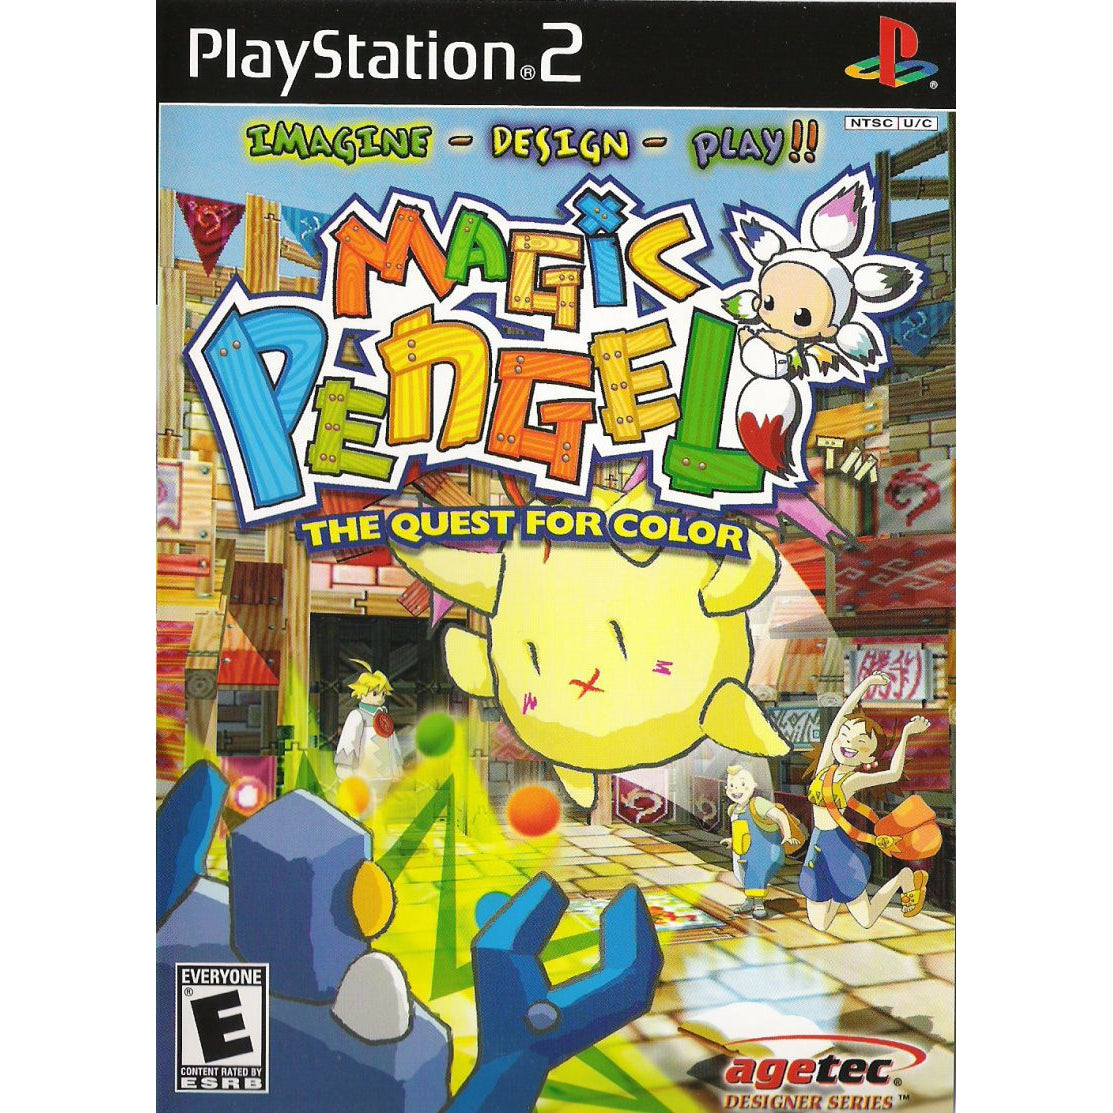 Magic Pengel: The Quest for Color - PlayStation 2 (PS2) Game Complete - YourGamingShop.com - Buy, Sell, Trade Video Games Online. 120 Day Warranty. Satisfaction Guaranteed.